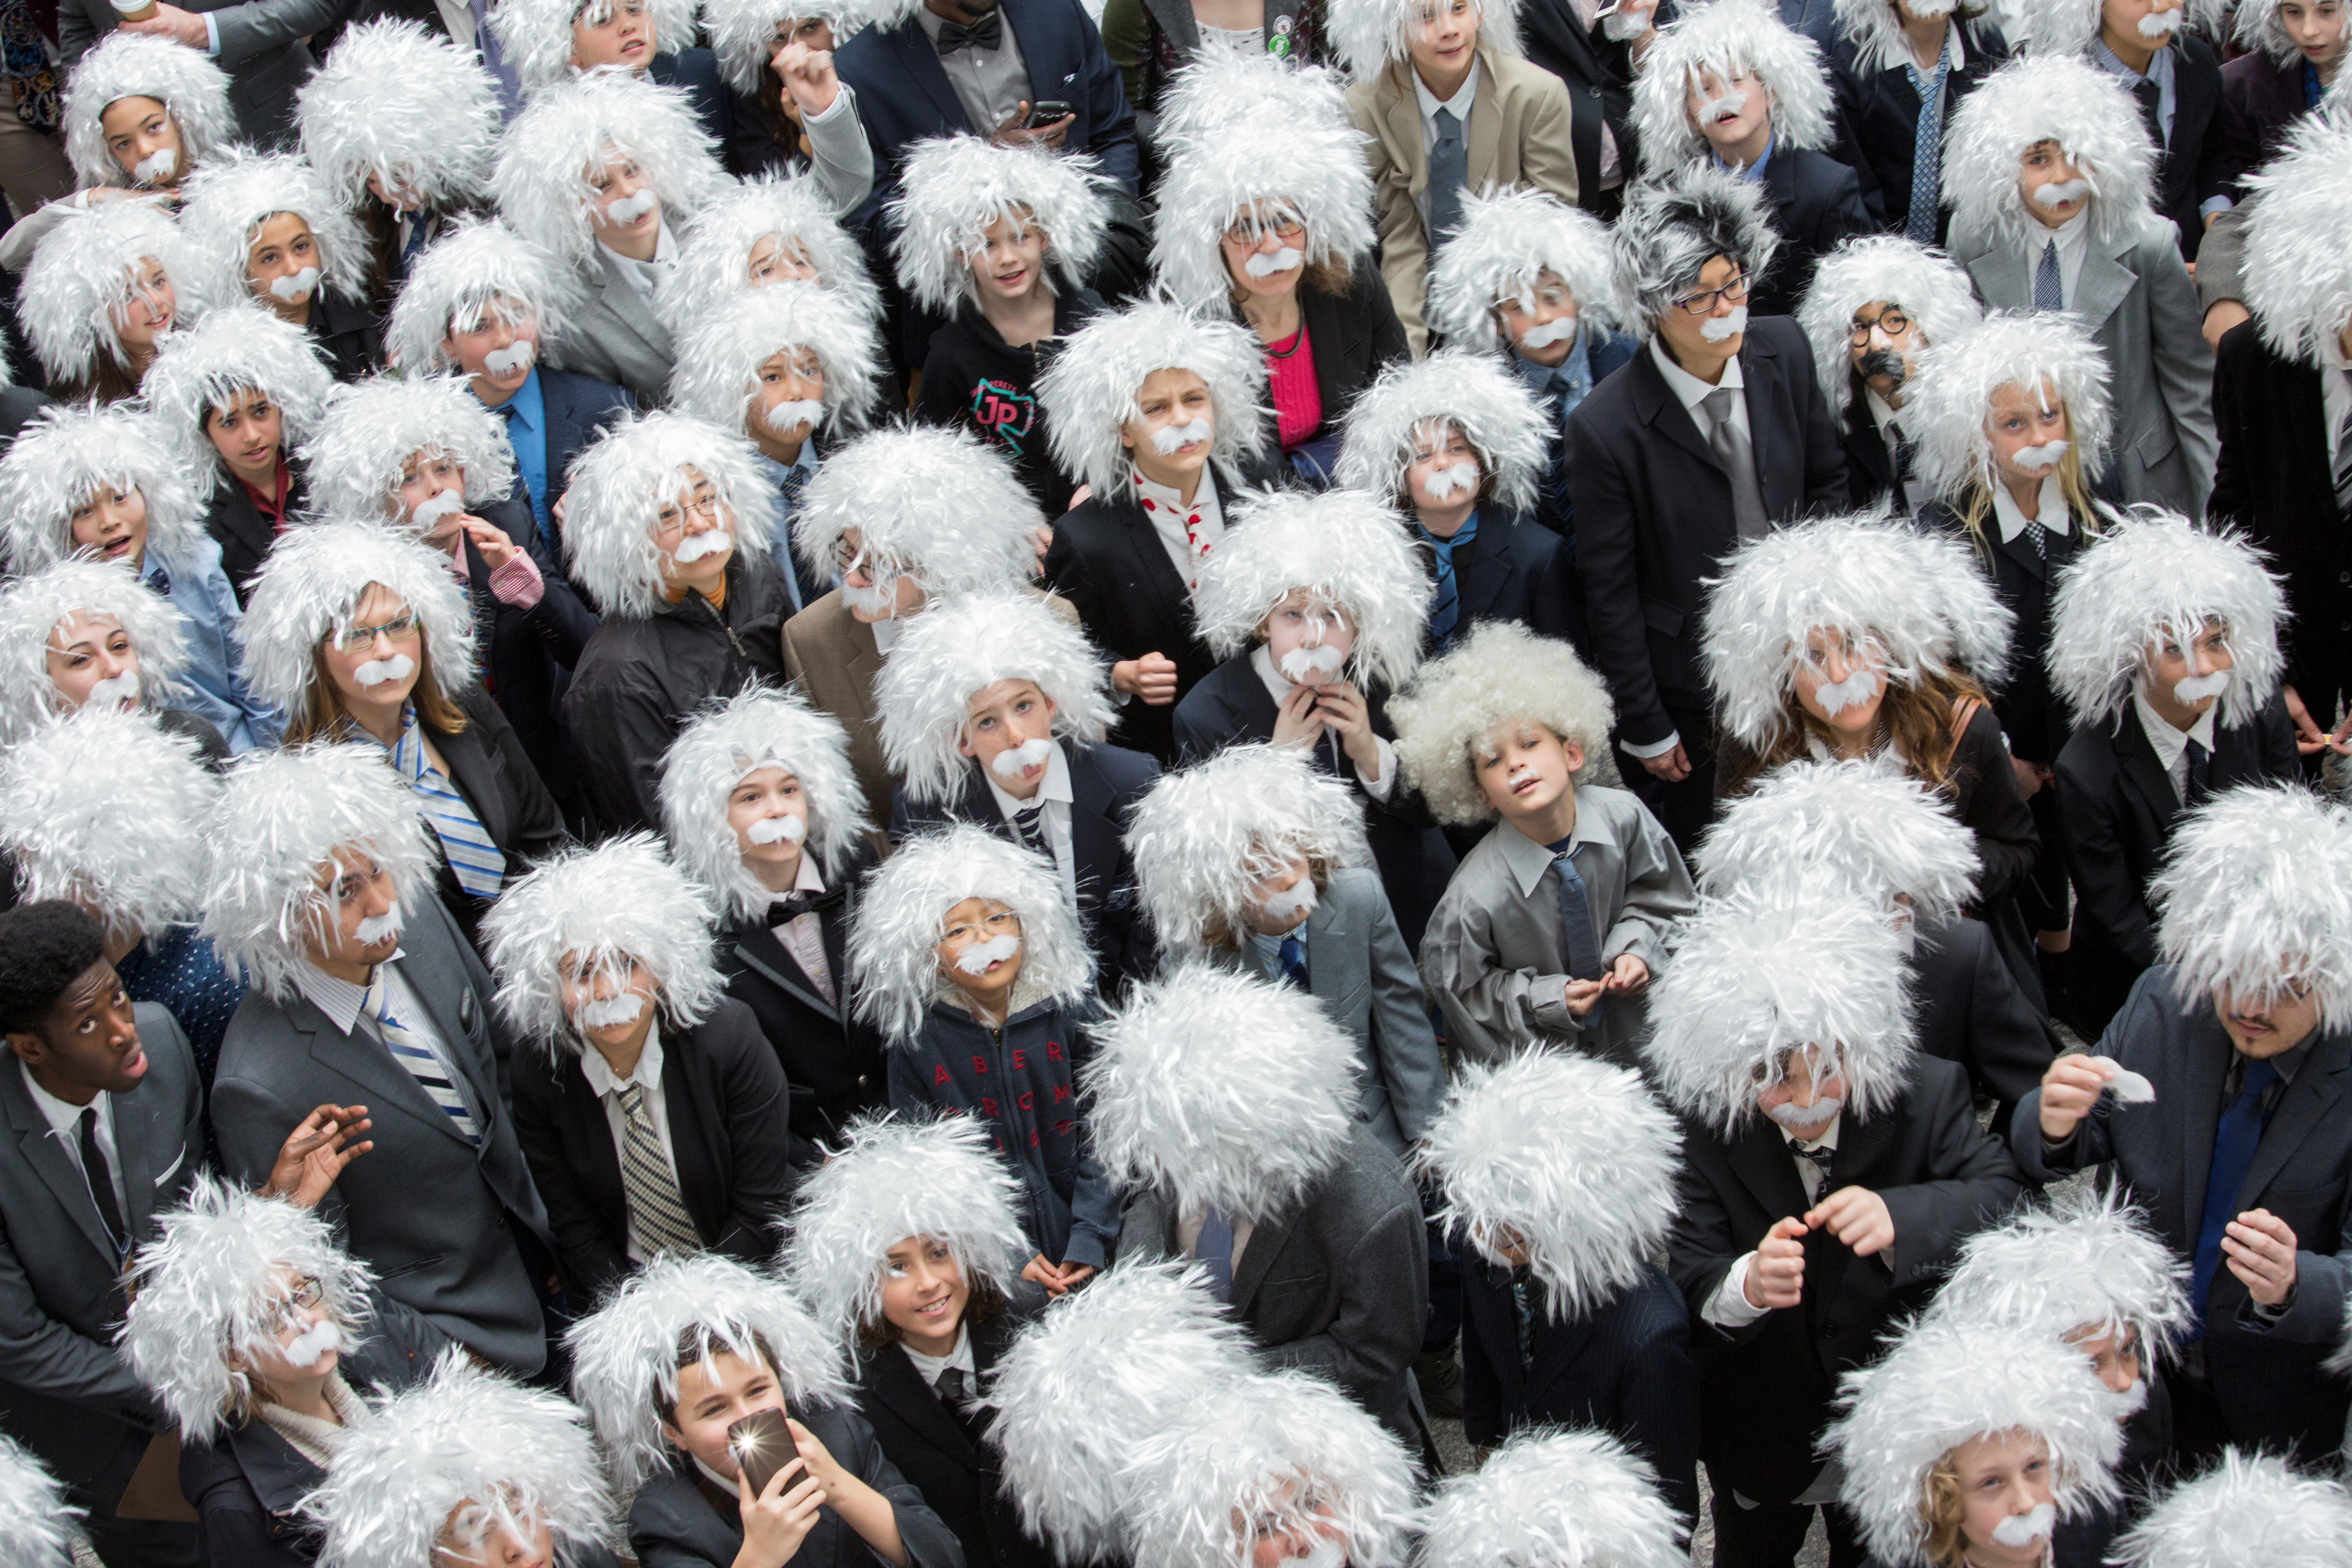 A whole lot of Einsteins.